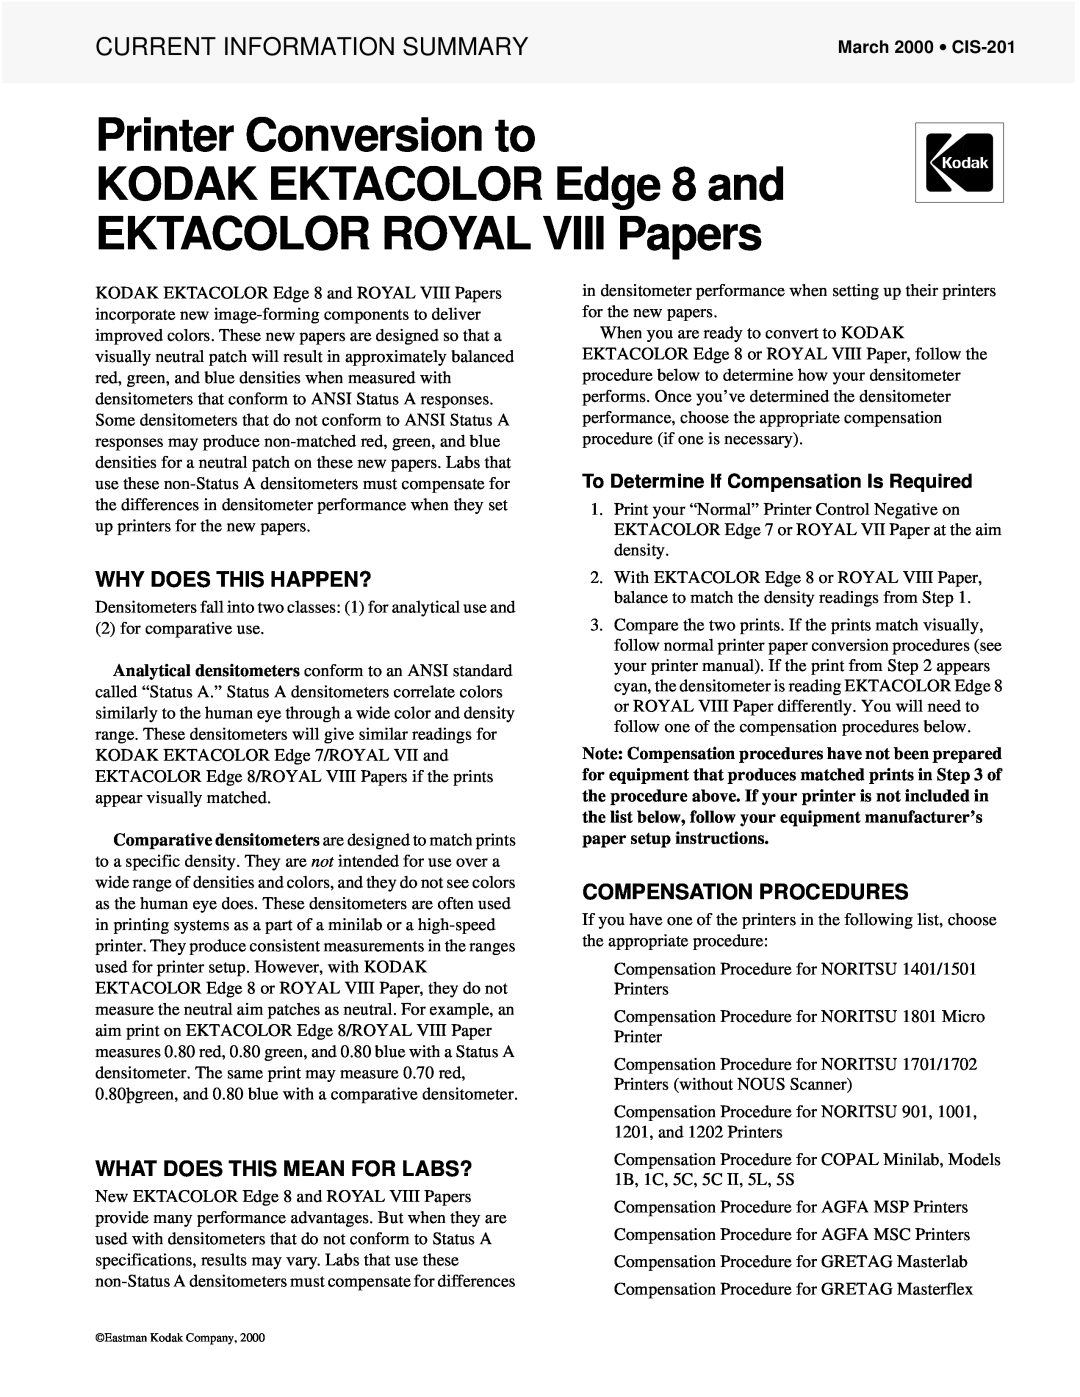 Kodak CIS-201 specifications Why Does This Happen?, What Does This Mean For Labs?, Compensation Procedures 